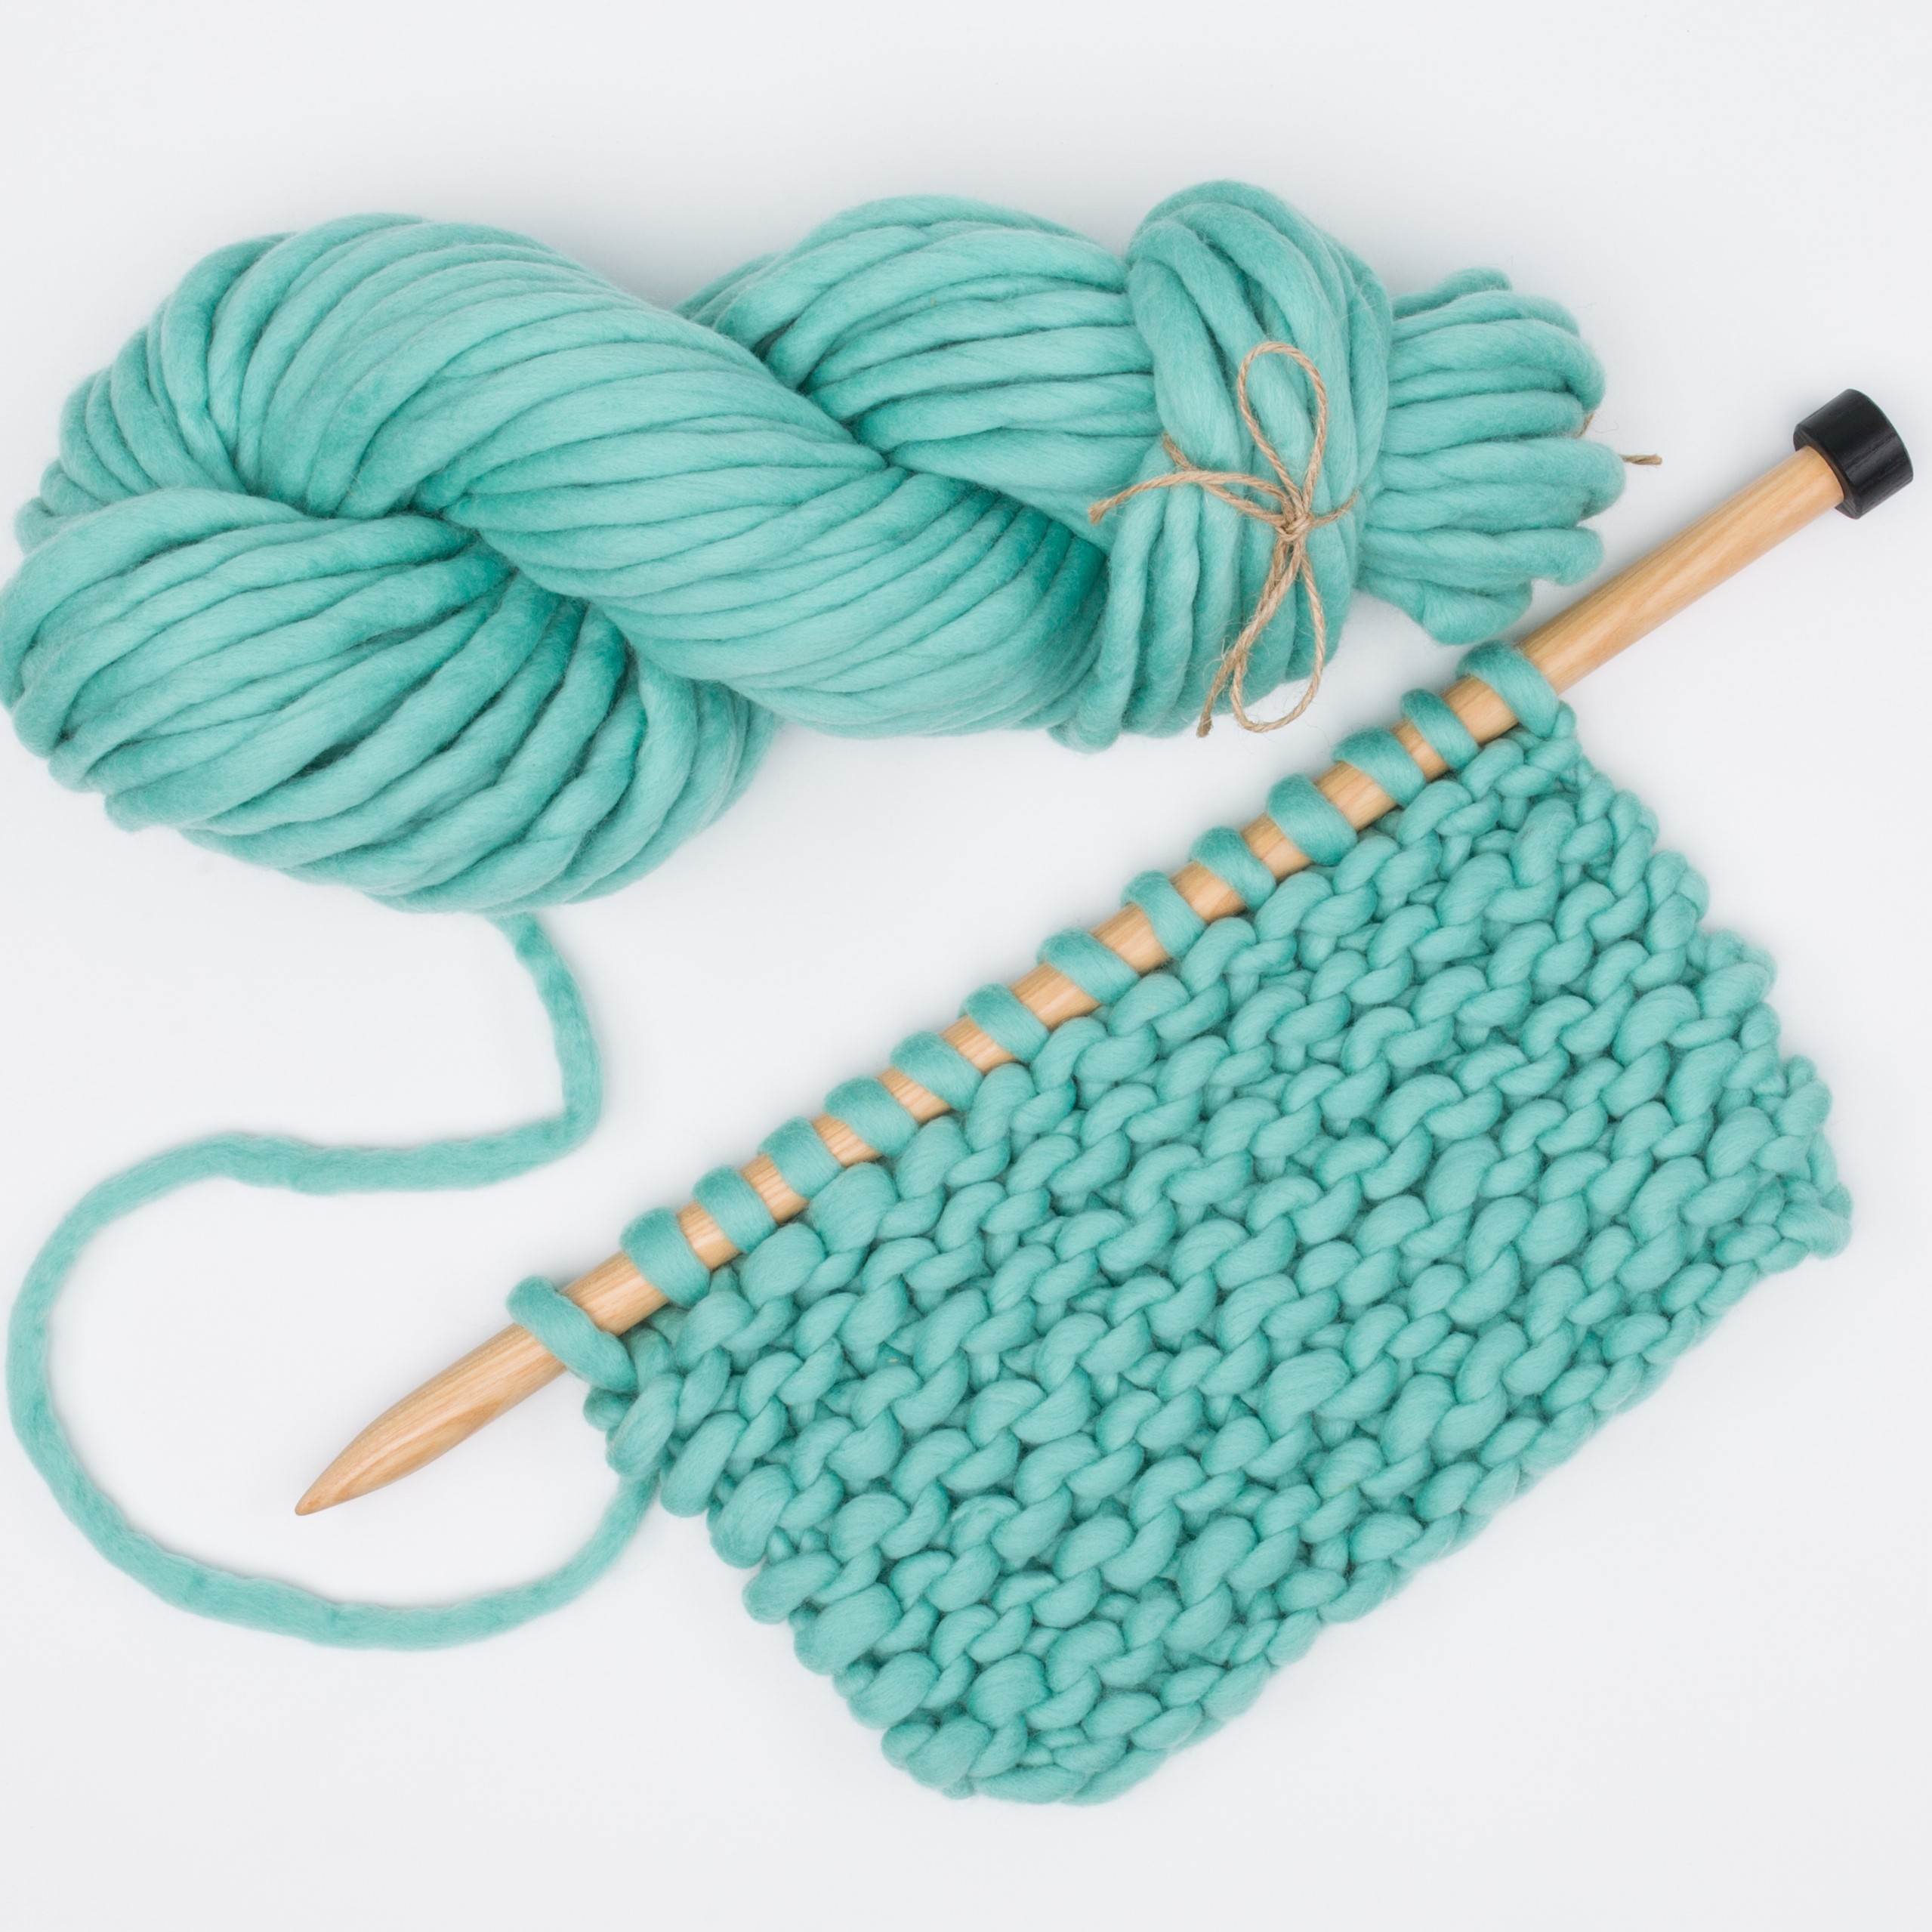 What size knitting needles do i need for super chunky wool